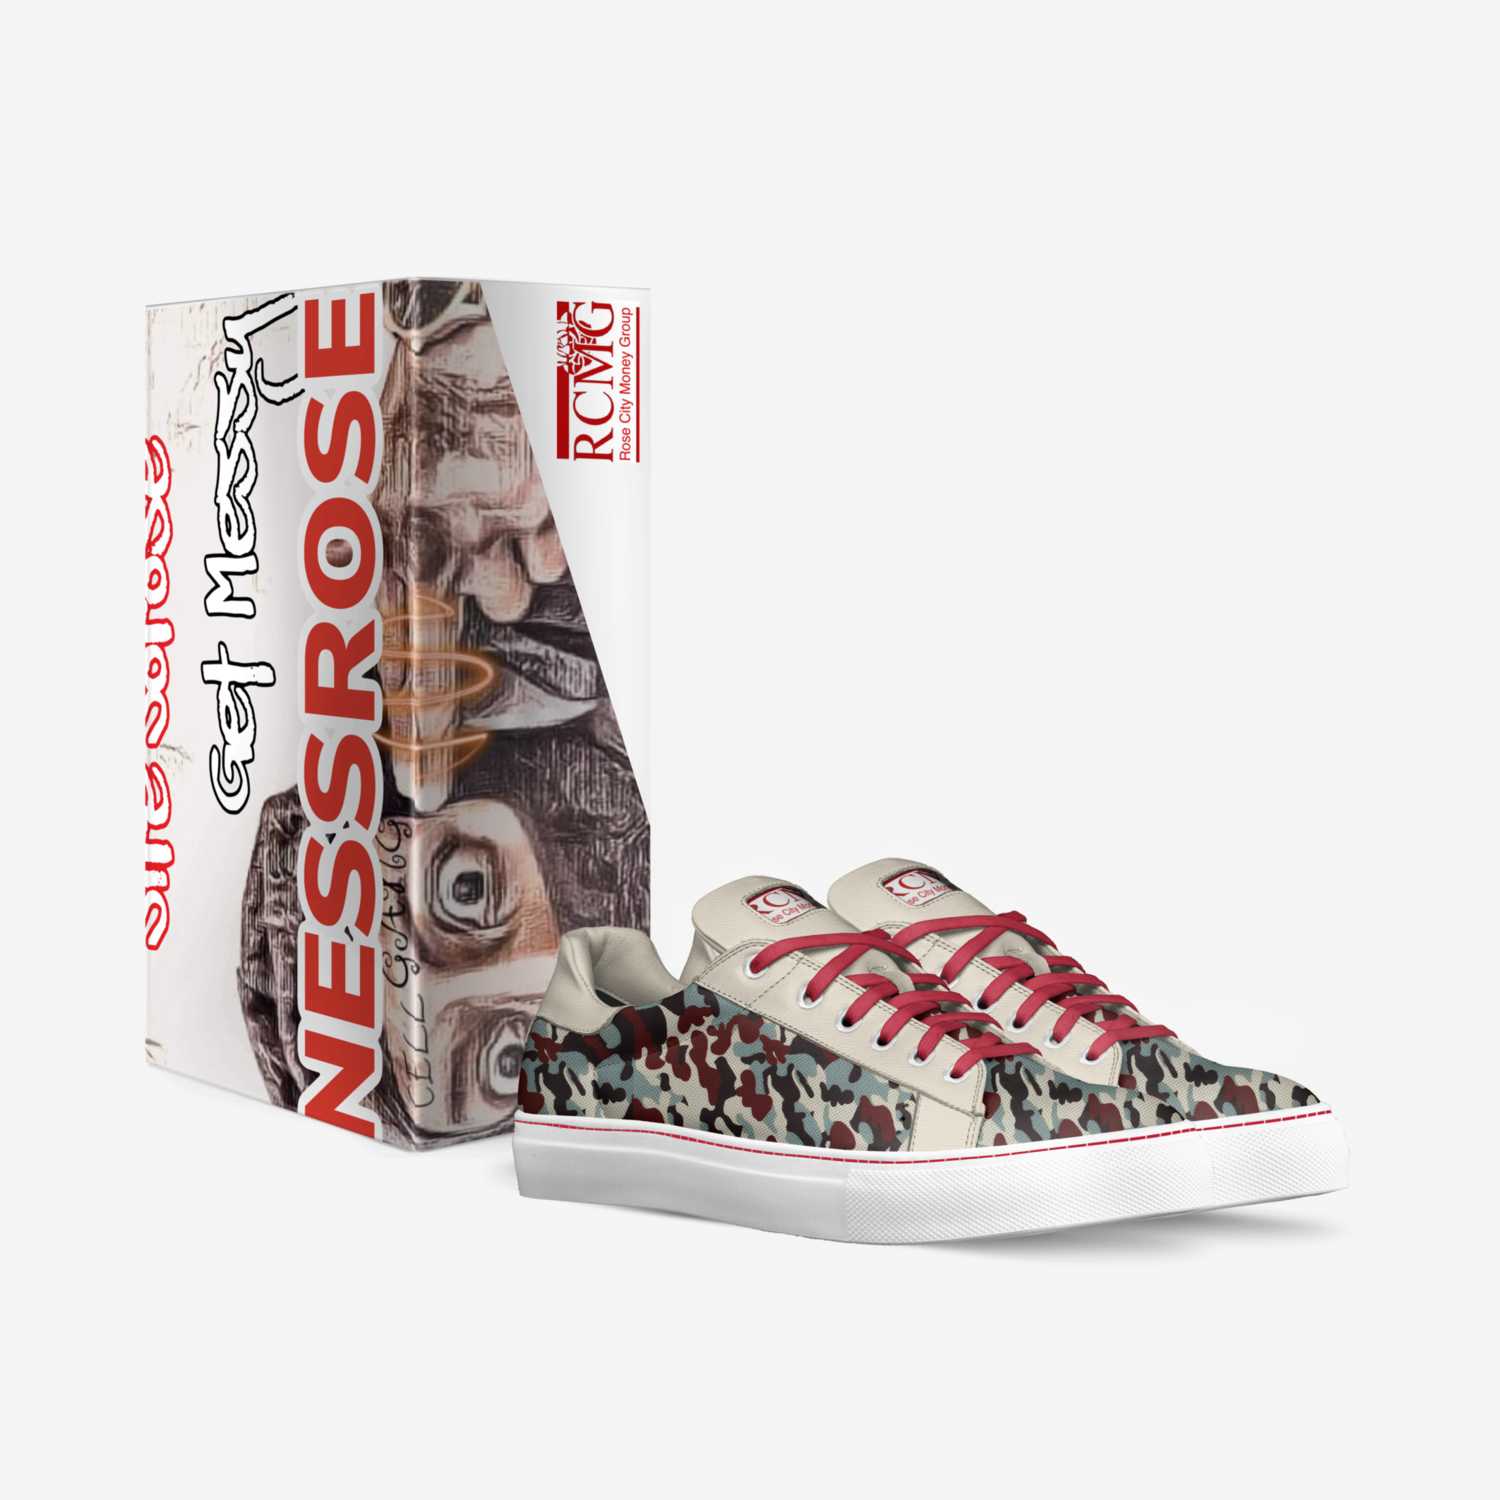 RCMG…NESSROSE custom made in Italy shoes by Sire Sorose | Box view